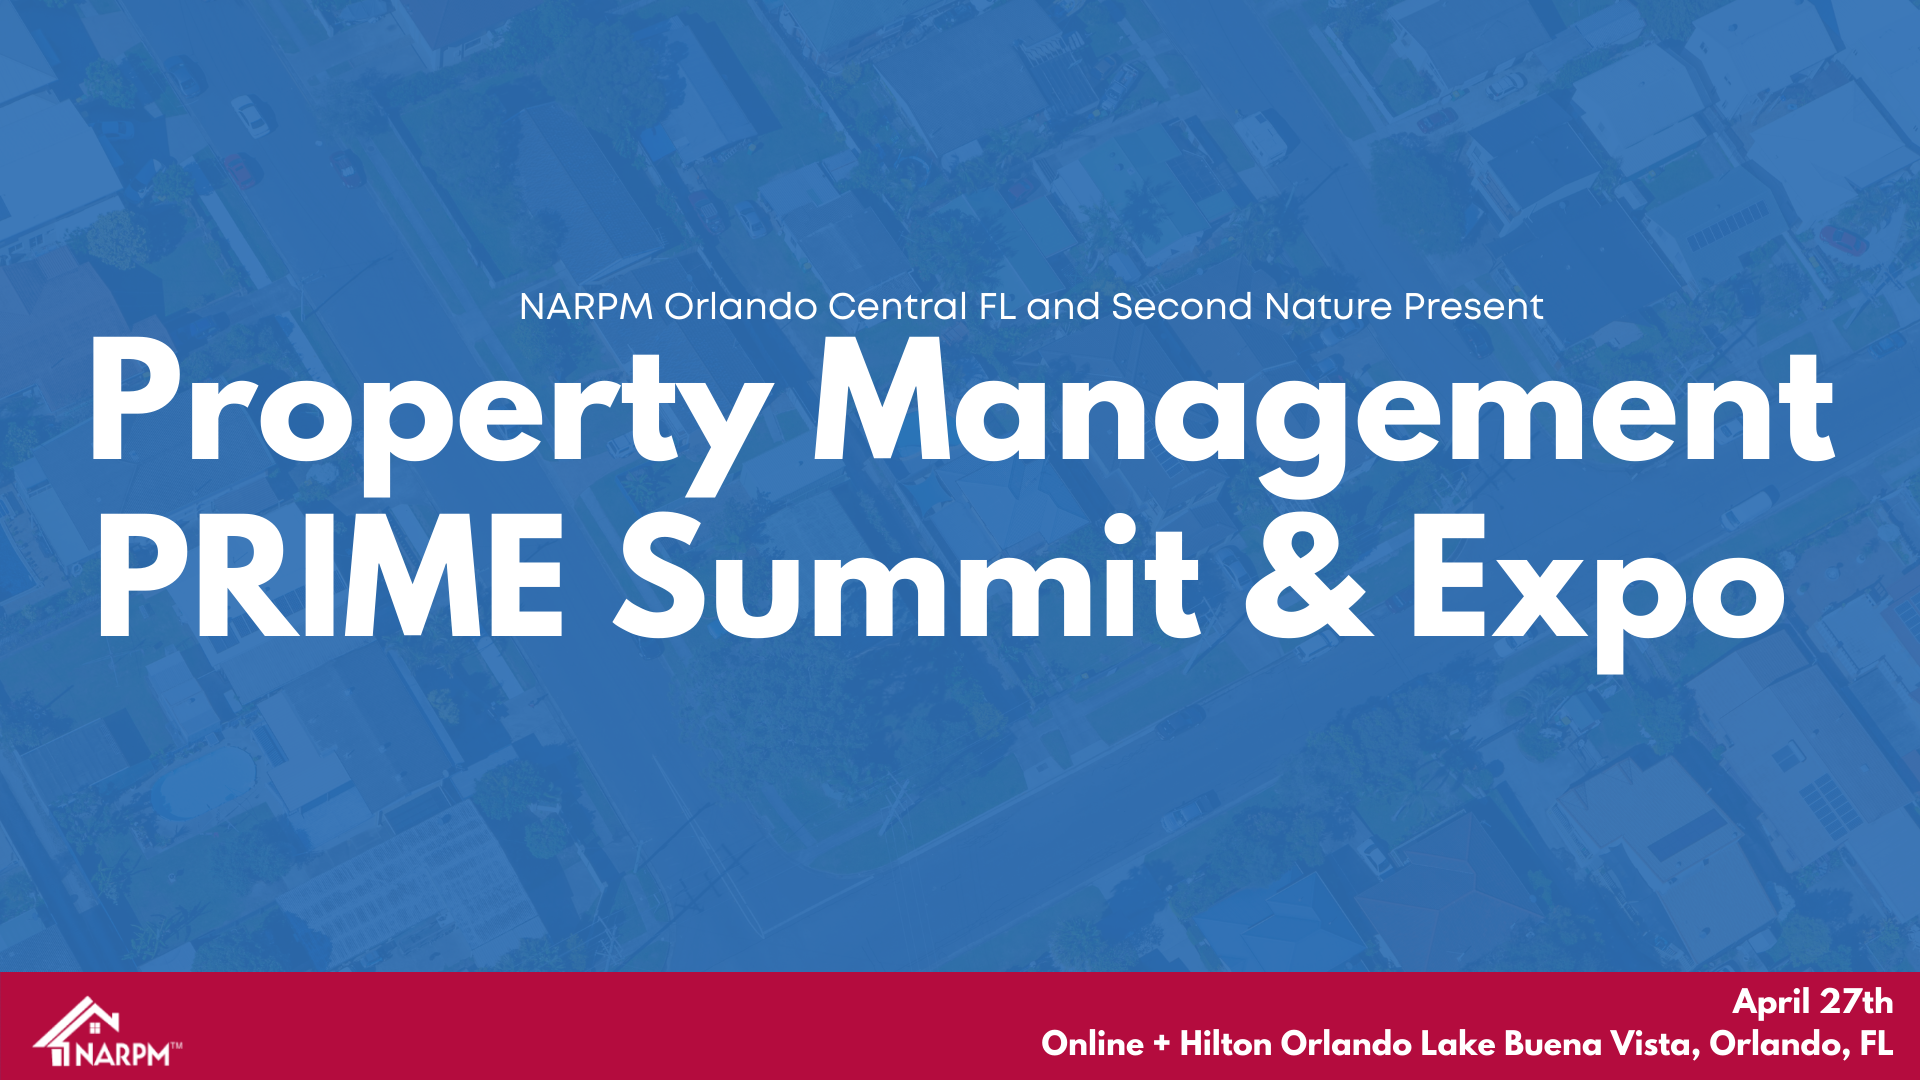 Photo for Property Management PRIME Summit and Expo Presented by NARPM Orlando Central FL and Second Nature on ViewStub